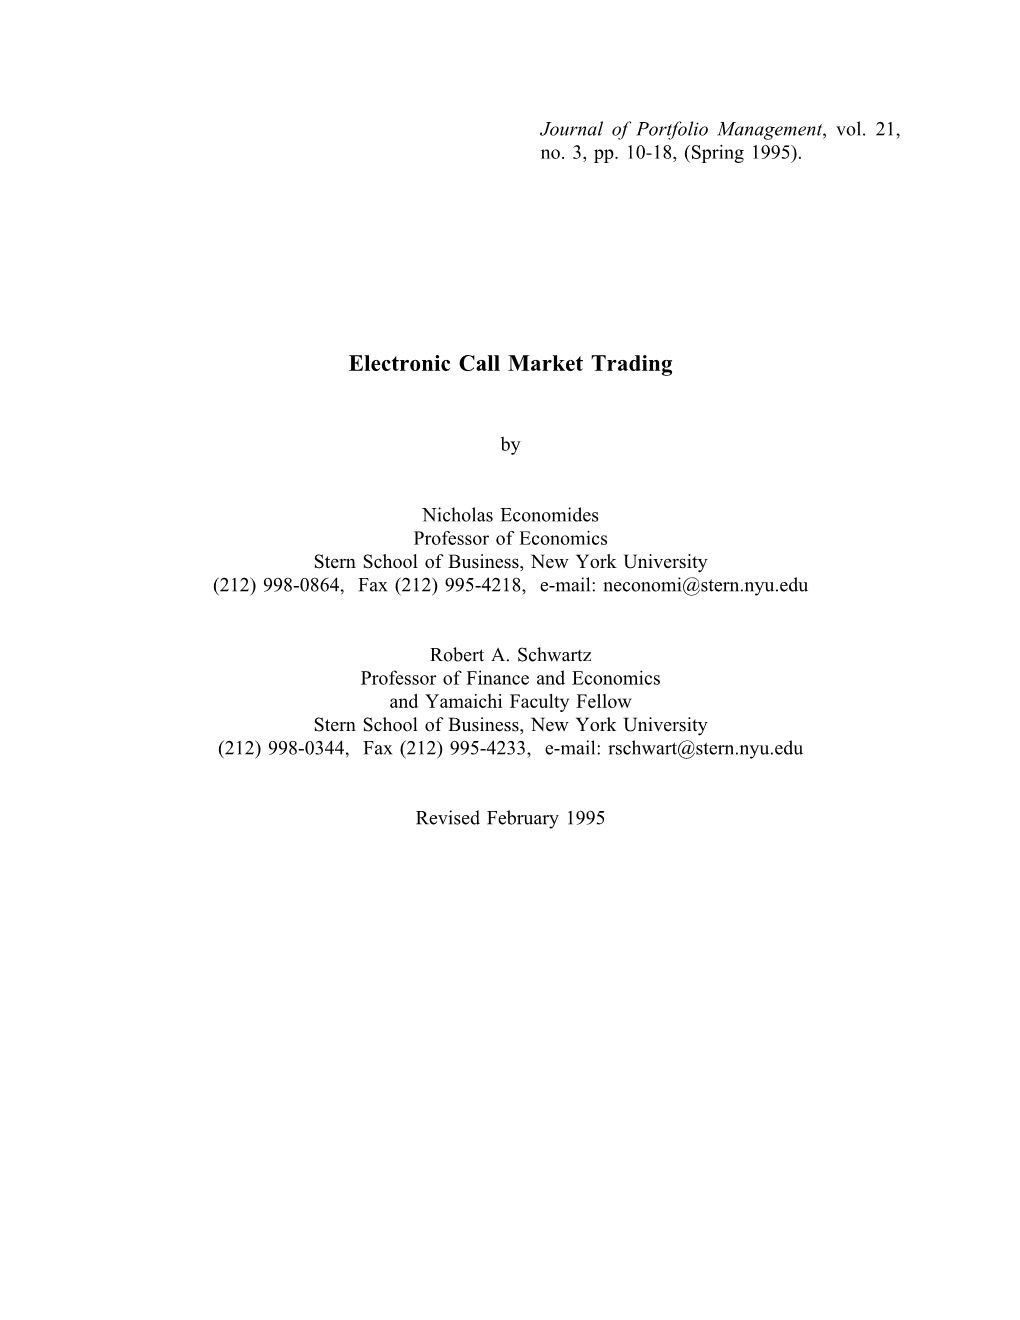 Electronic Call Market Trading